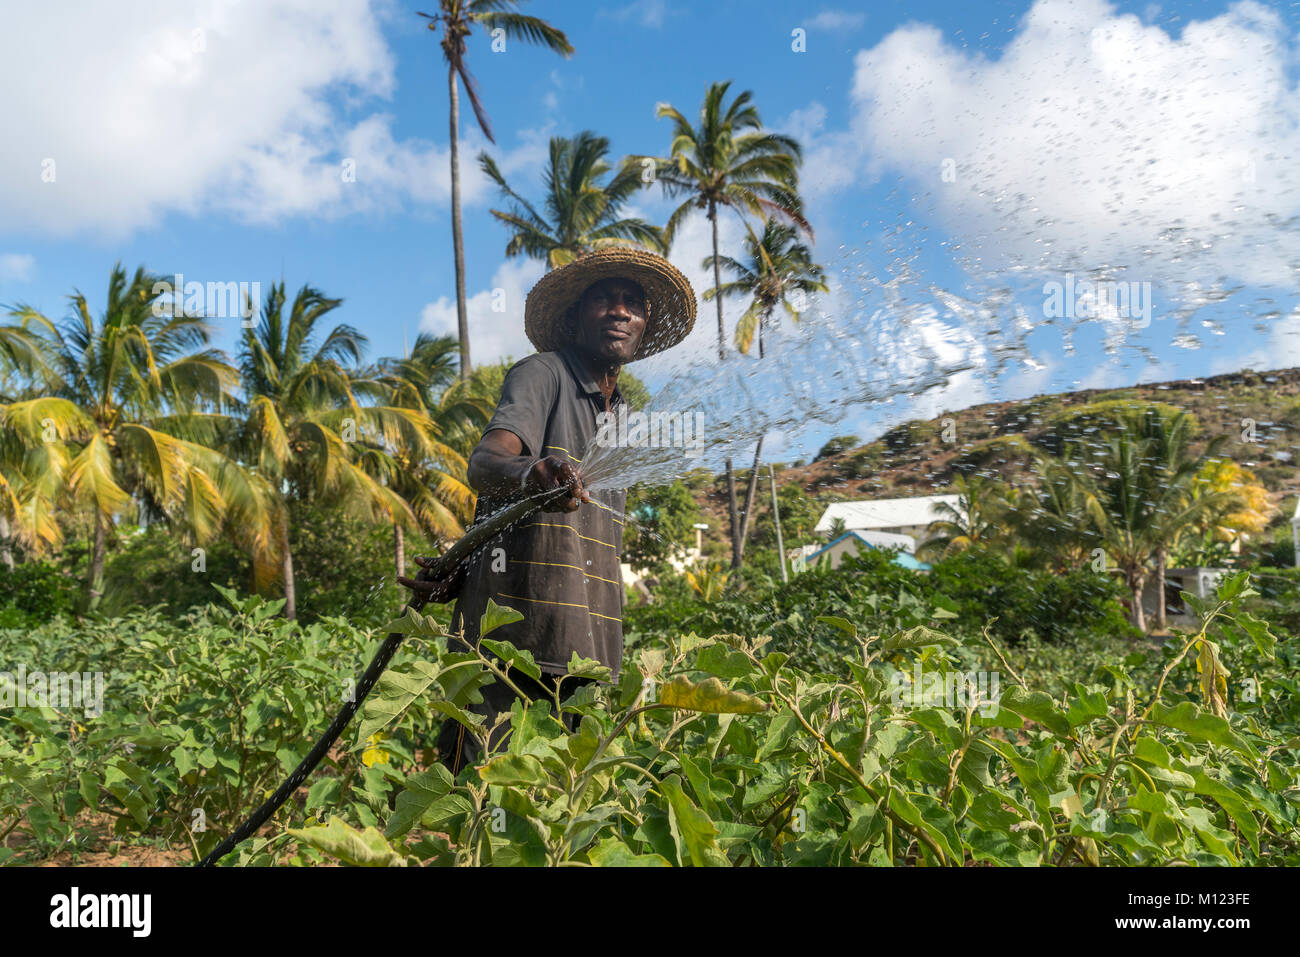 L'agricoltore africano campo irrigaties,Saint Francois,isola Rodrigues,Maurizio Foto Stock